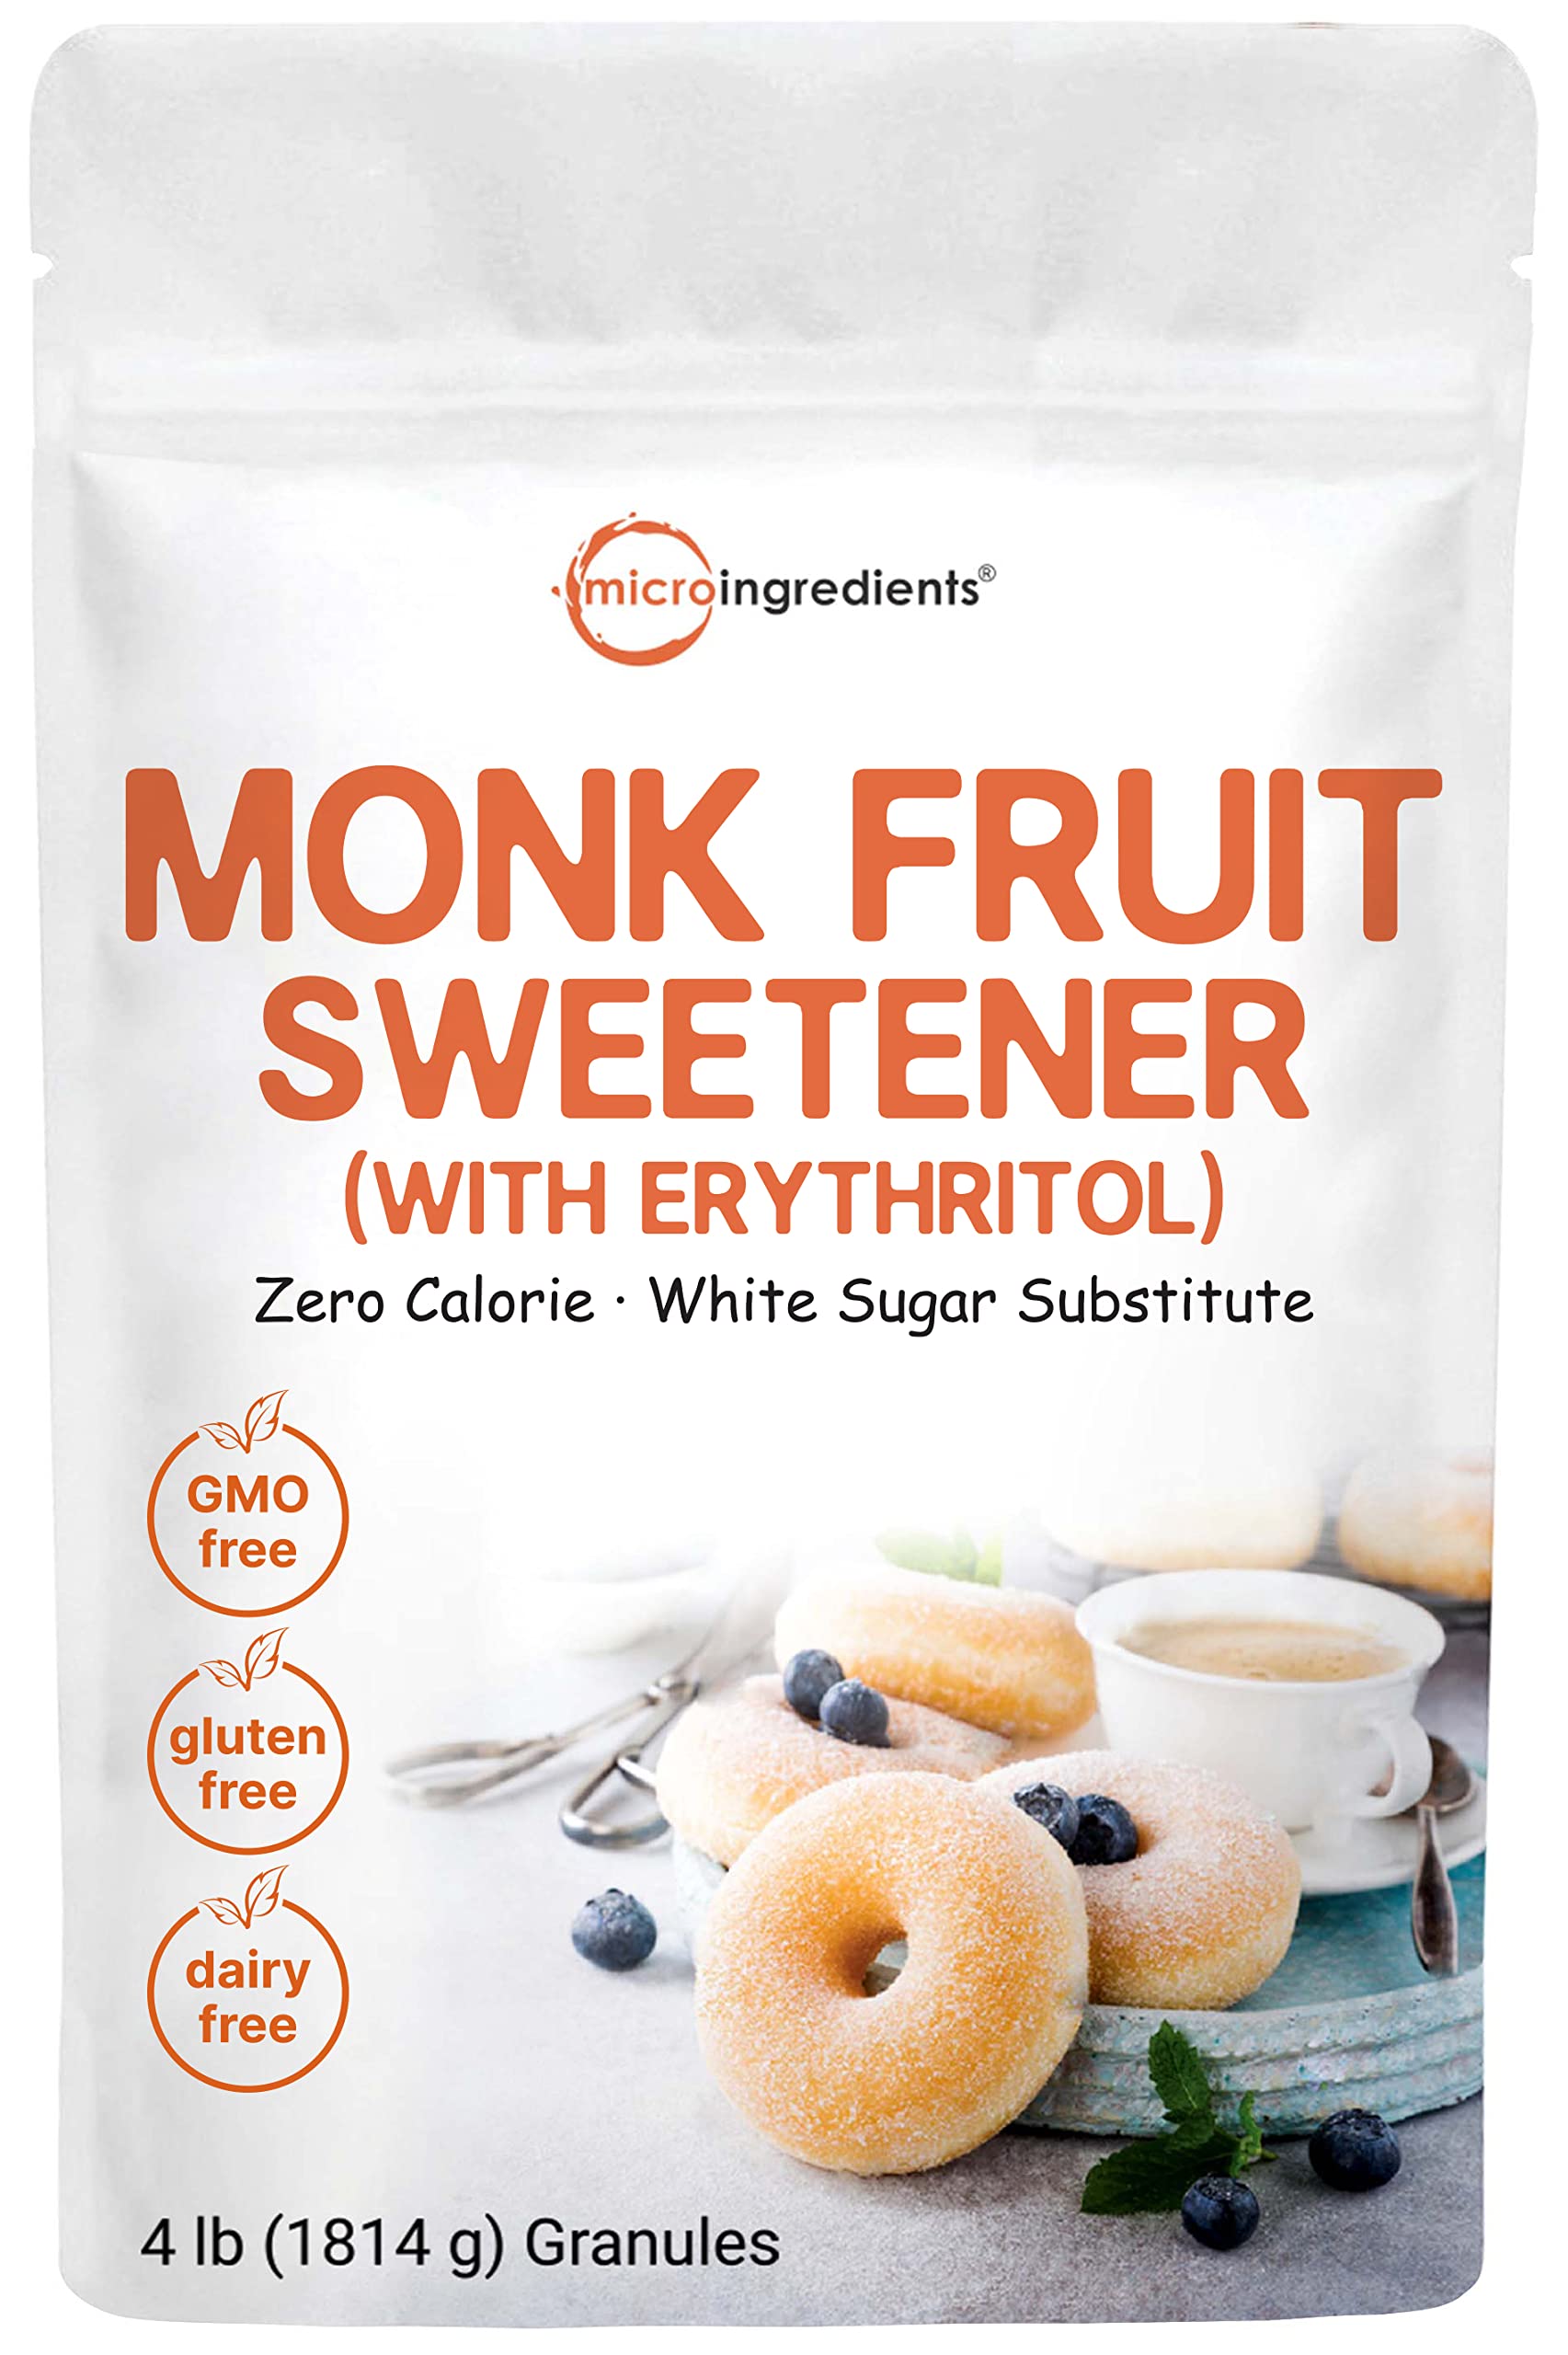 Monk Fruit Sweetener with Erythritol Granules, 4 Pounds, No After Taste, 1:1 White Sugar Substitute, Keto Diet Friendly, Zero Calorie, Natural Swee...